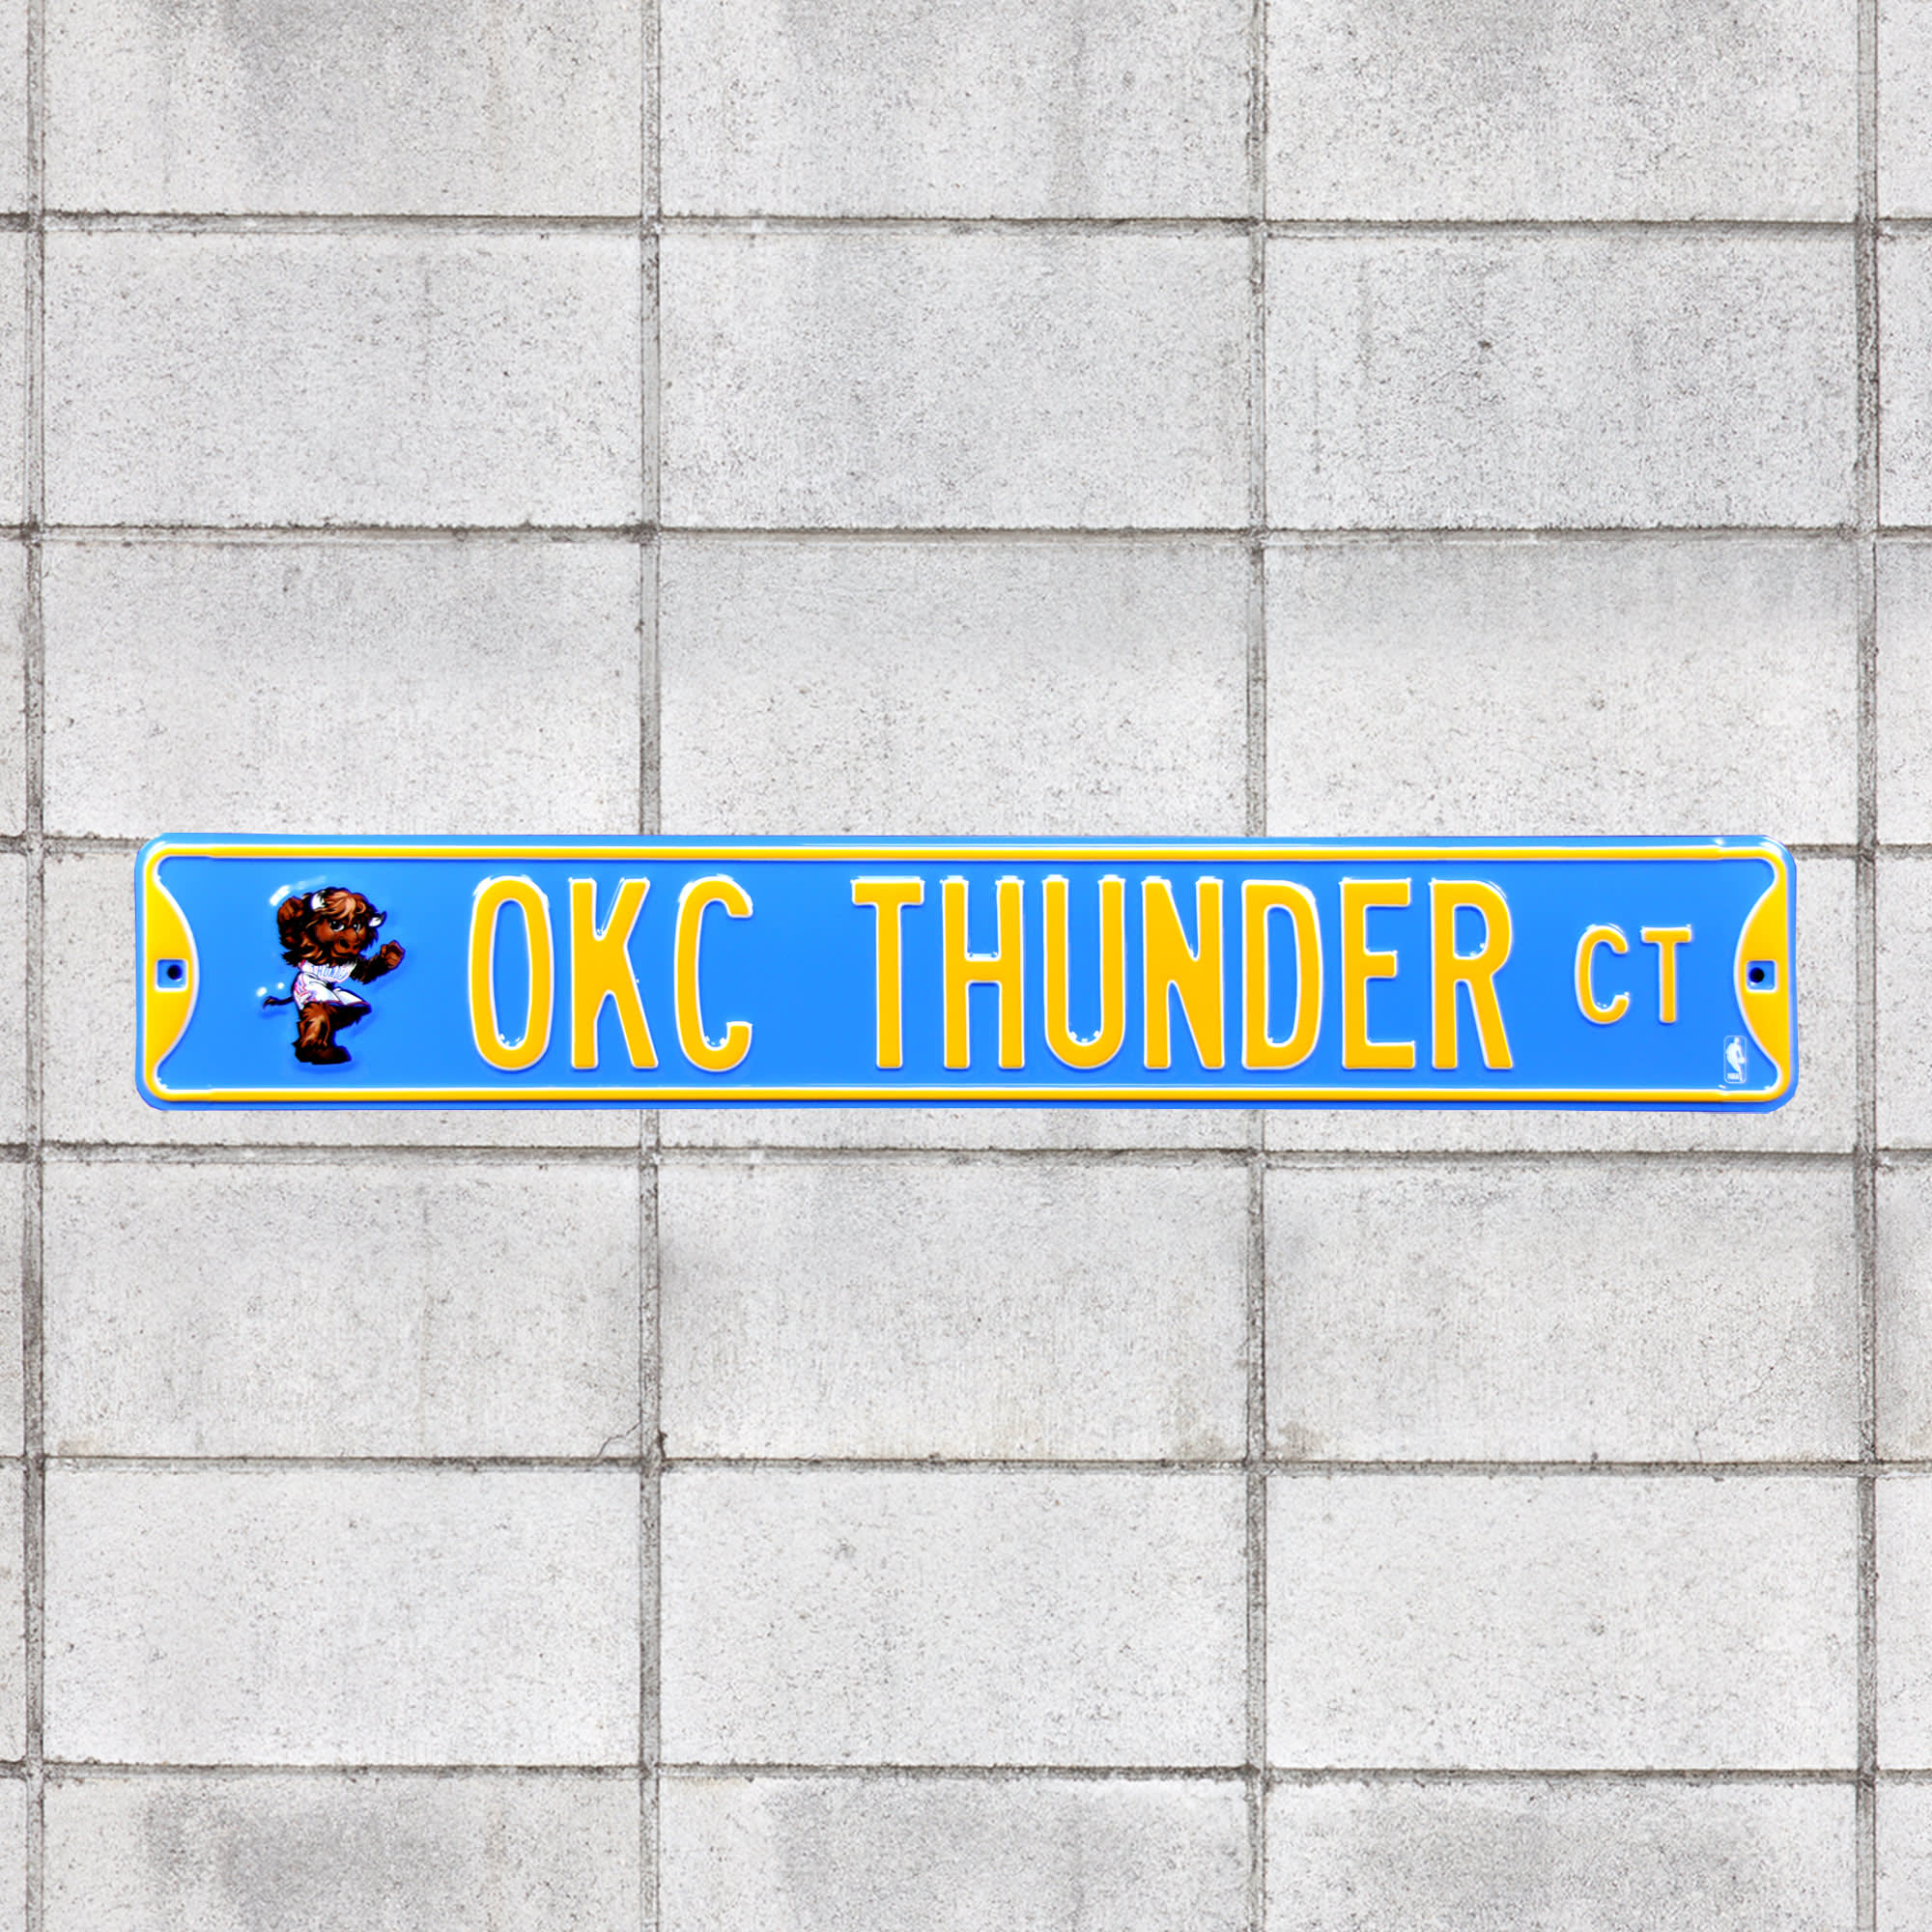 Oklahoma City Thunder: Court - Officially Licensed NBA Metal Street Sign 36.0"W x 6.0"H by Fathead | 100% Steel